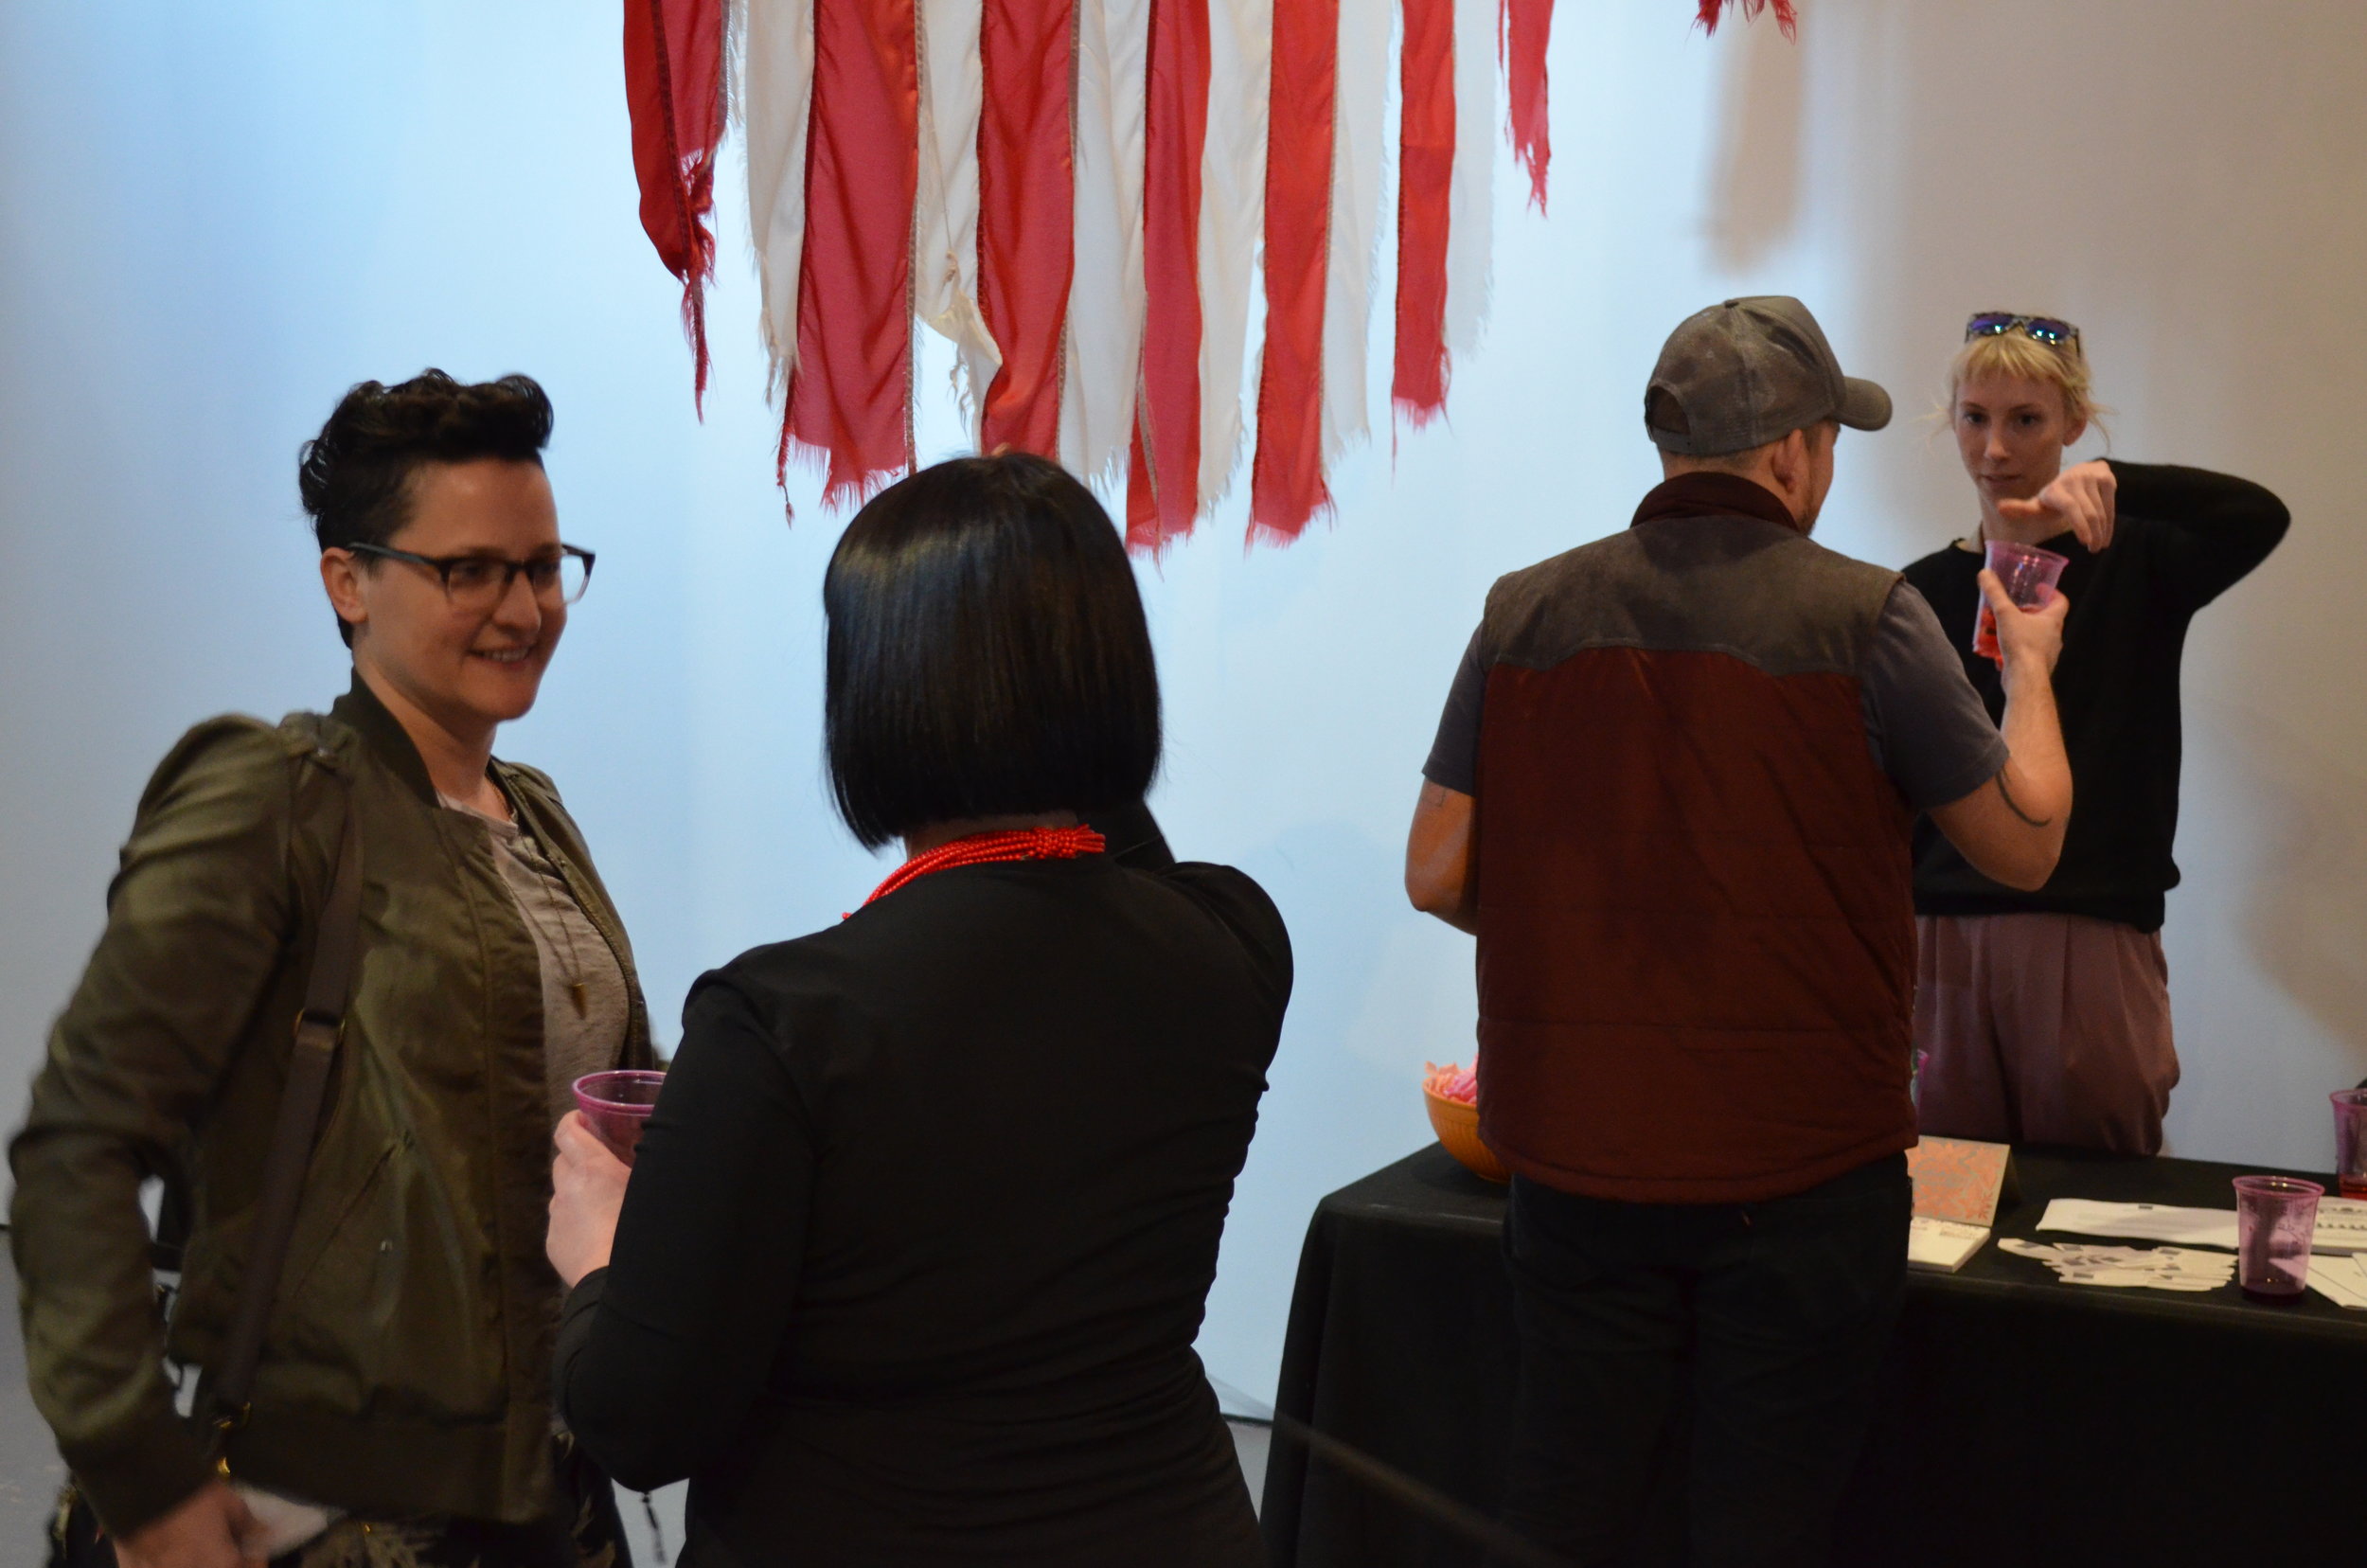  Dissolv-ers enjoy refreshments, merriment, and literature at the Dissolve Issue 3 event, "So Touchy," at the San Francisco Art Institute, Walter and McBean Galleries, February 28, 2017. 